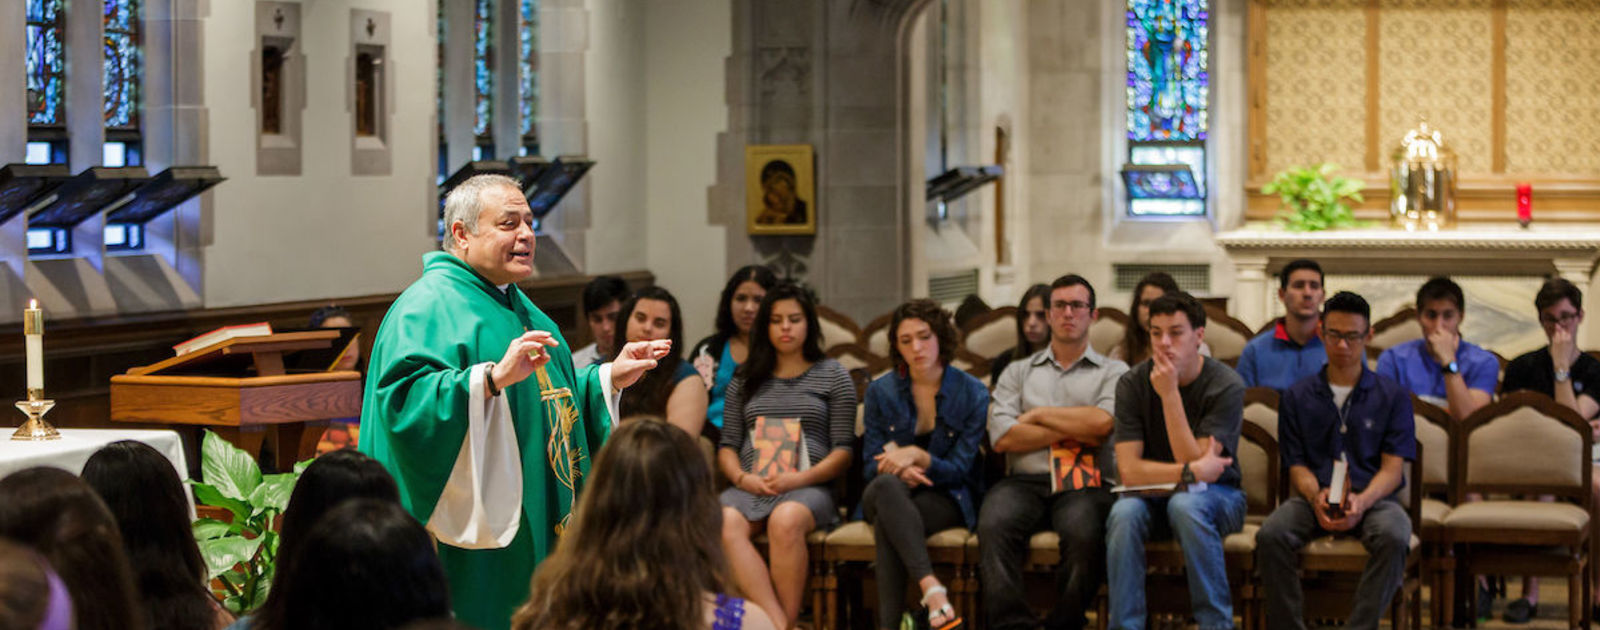 Doing Mercy: Hours Not to Reason Why | Notre Dame Magazine | University of Notre Dame